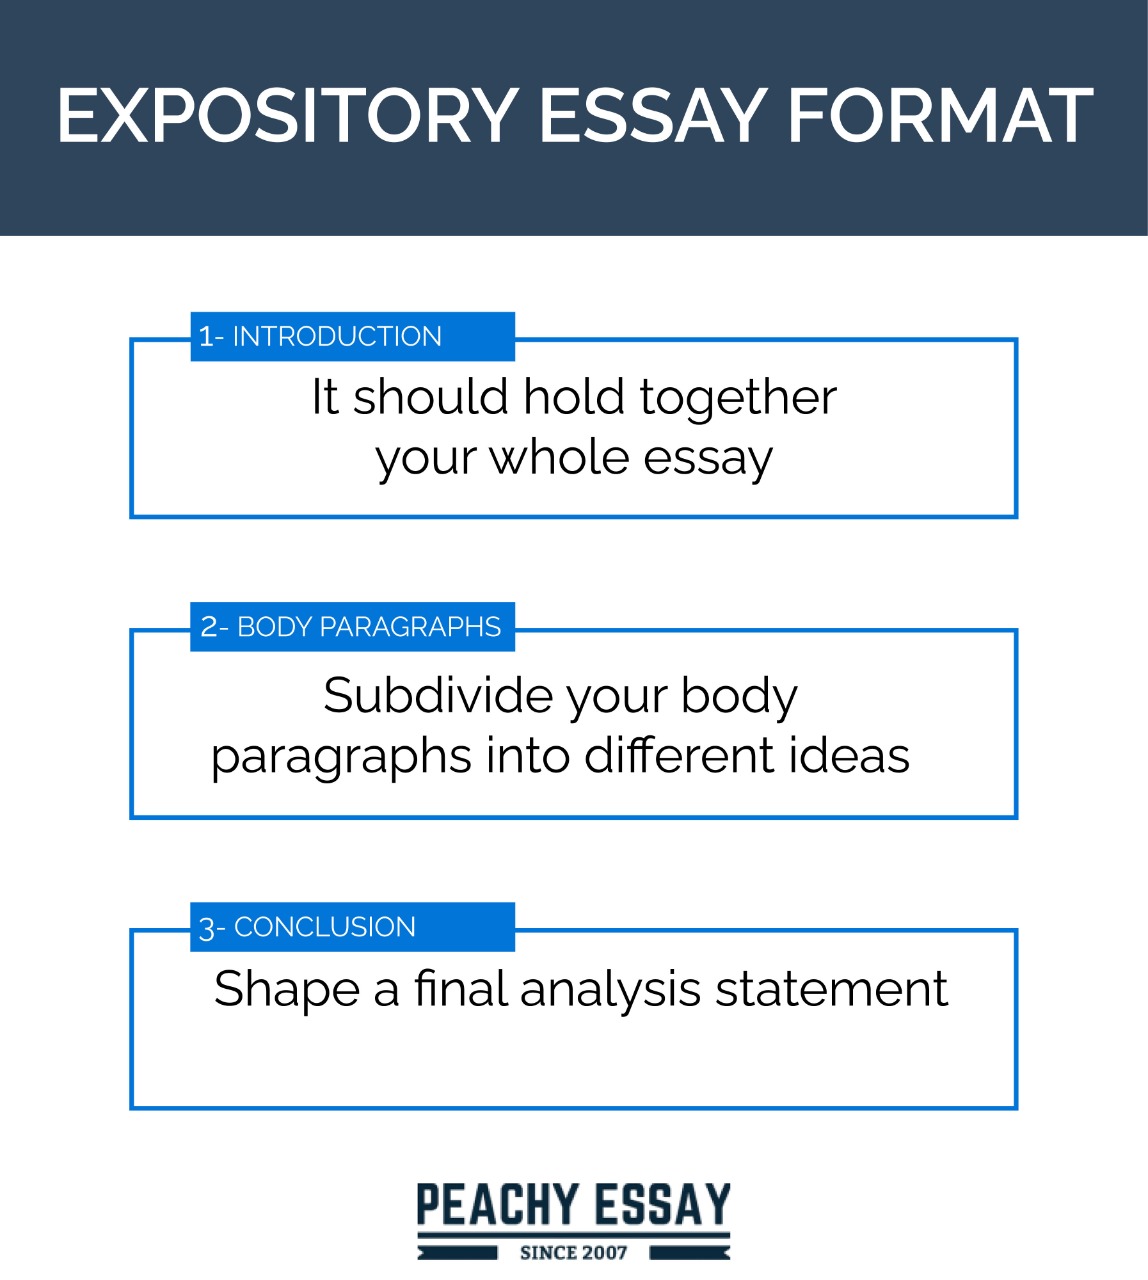 5 paragraph expository essay